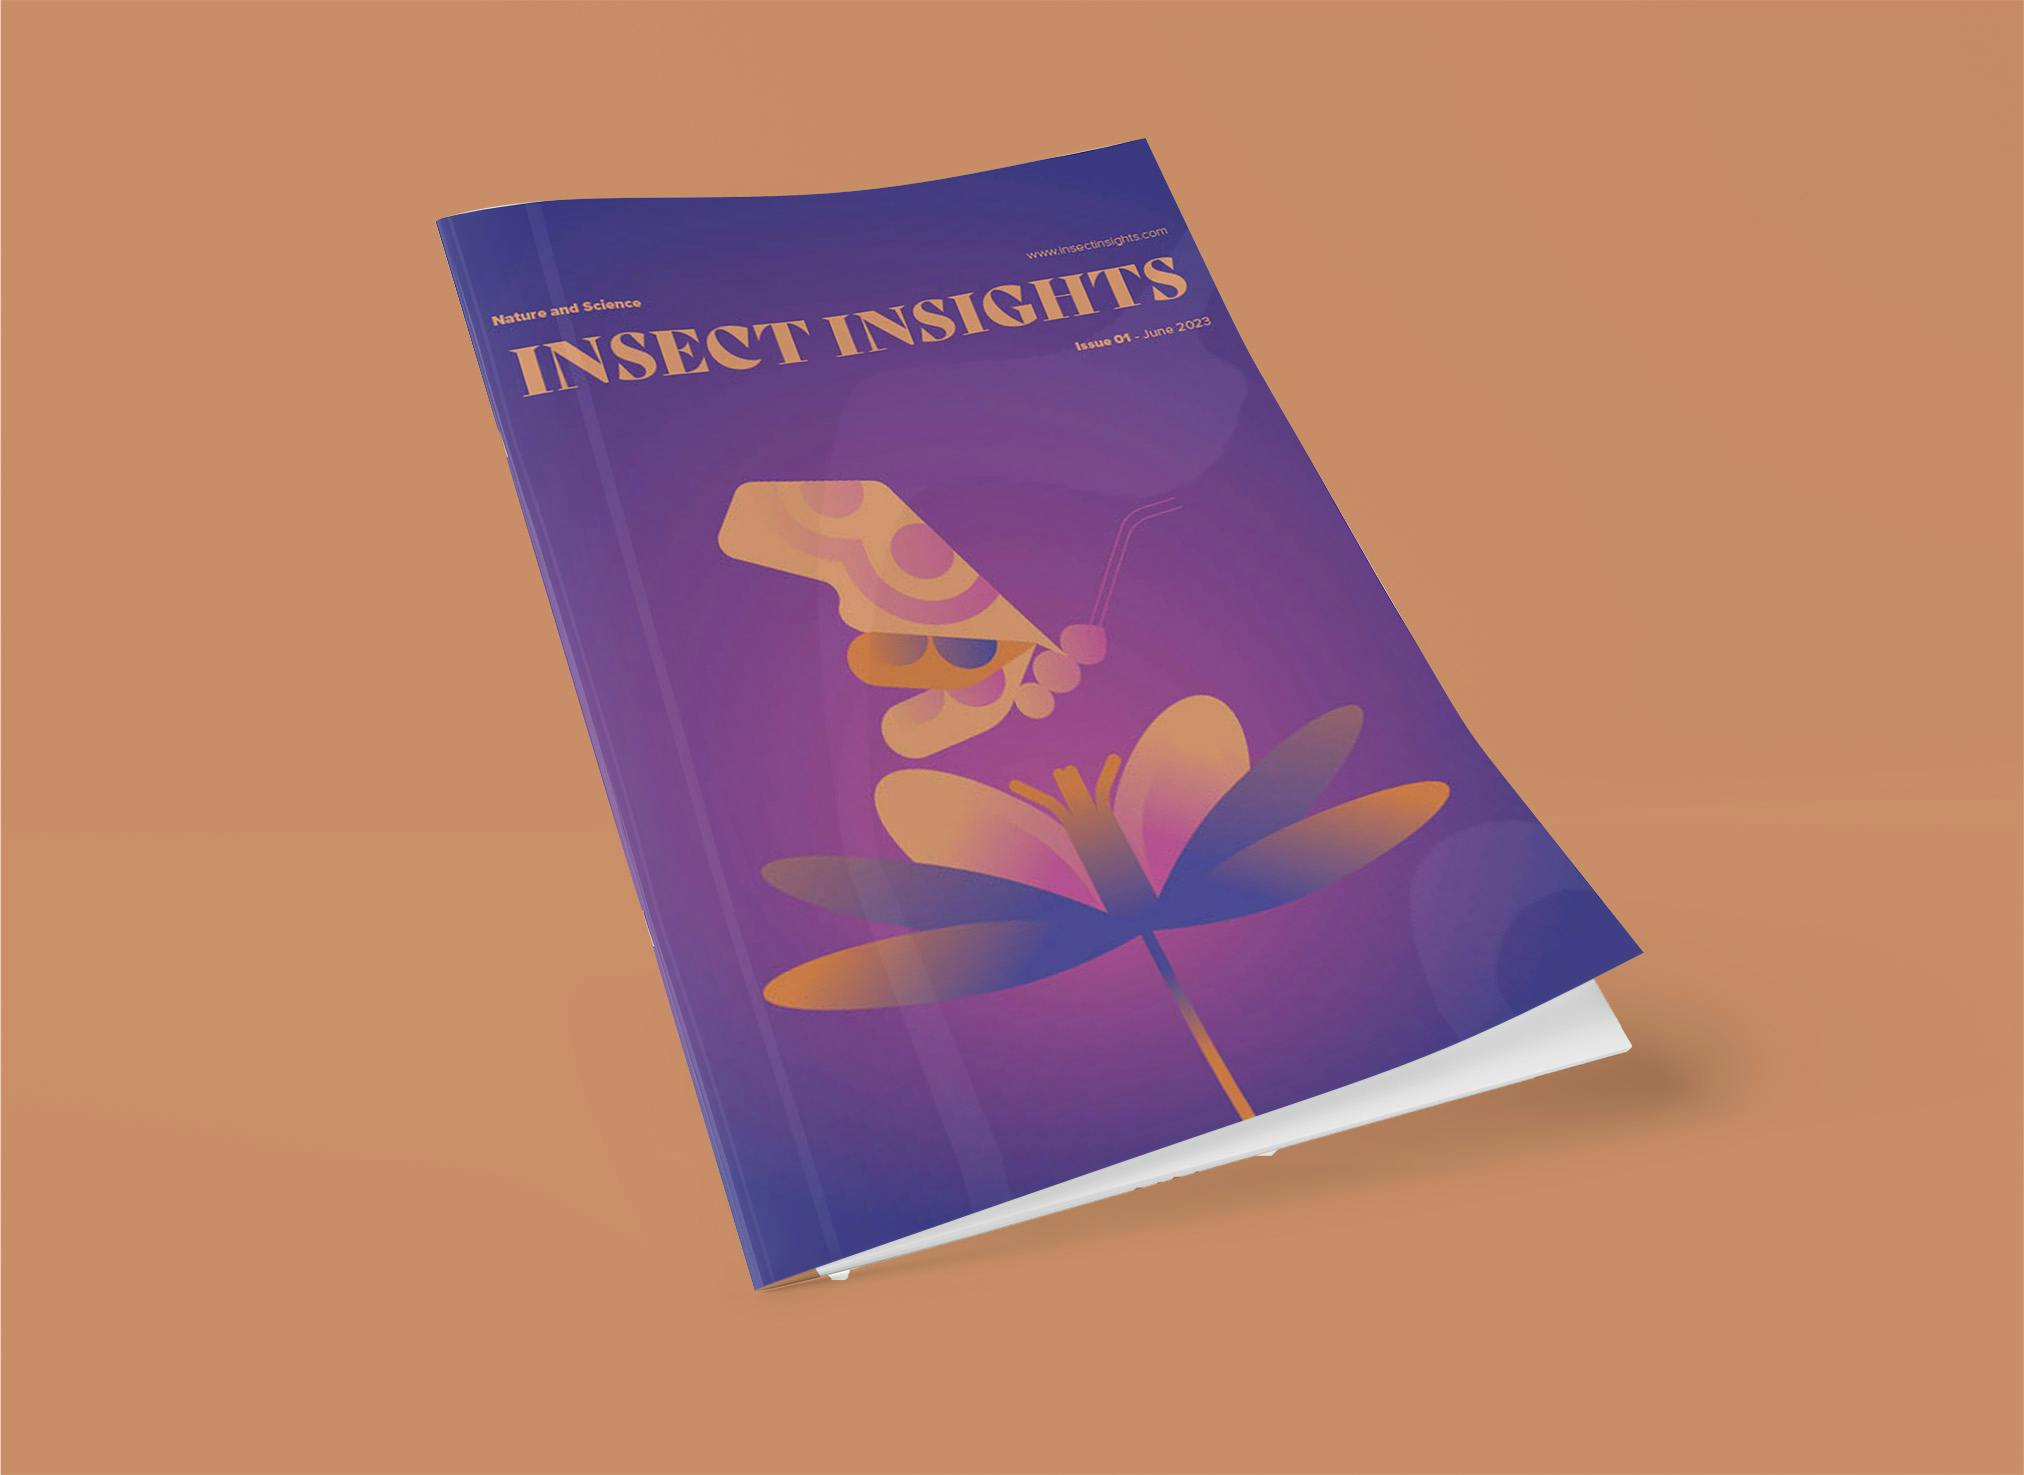 Publication Design: Insect Insights